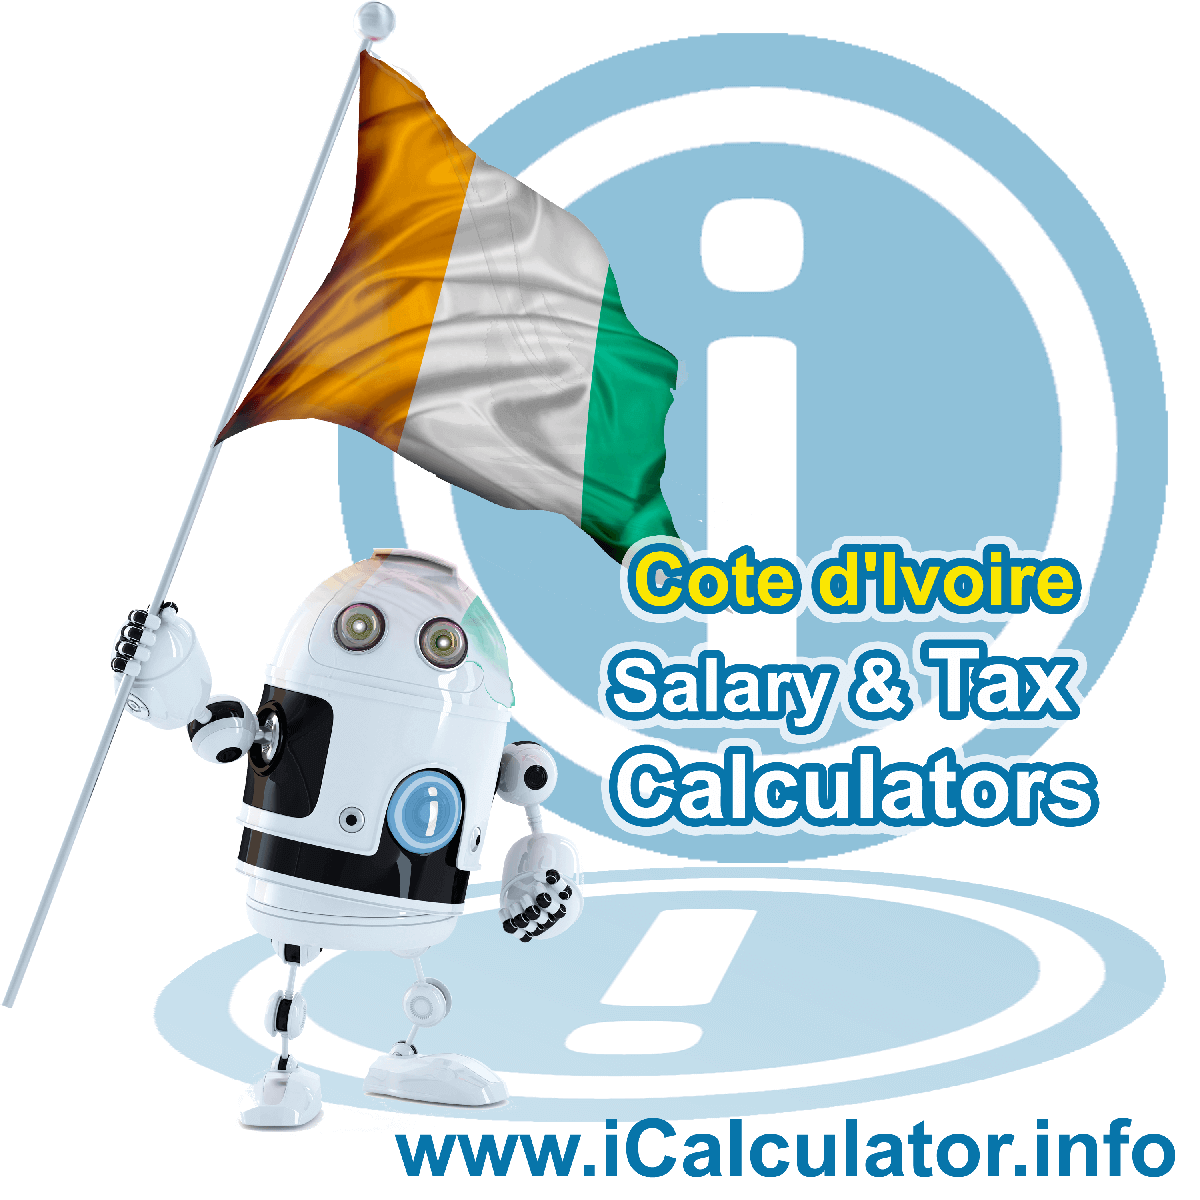 Cote Divoire Salary Calculator. This image shows the Cote Divoireese flag and information relating to the tax formula for the Cote Divoire Tax Calculator